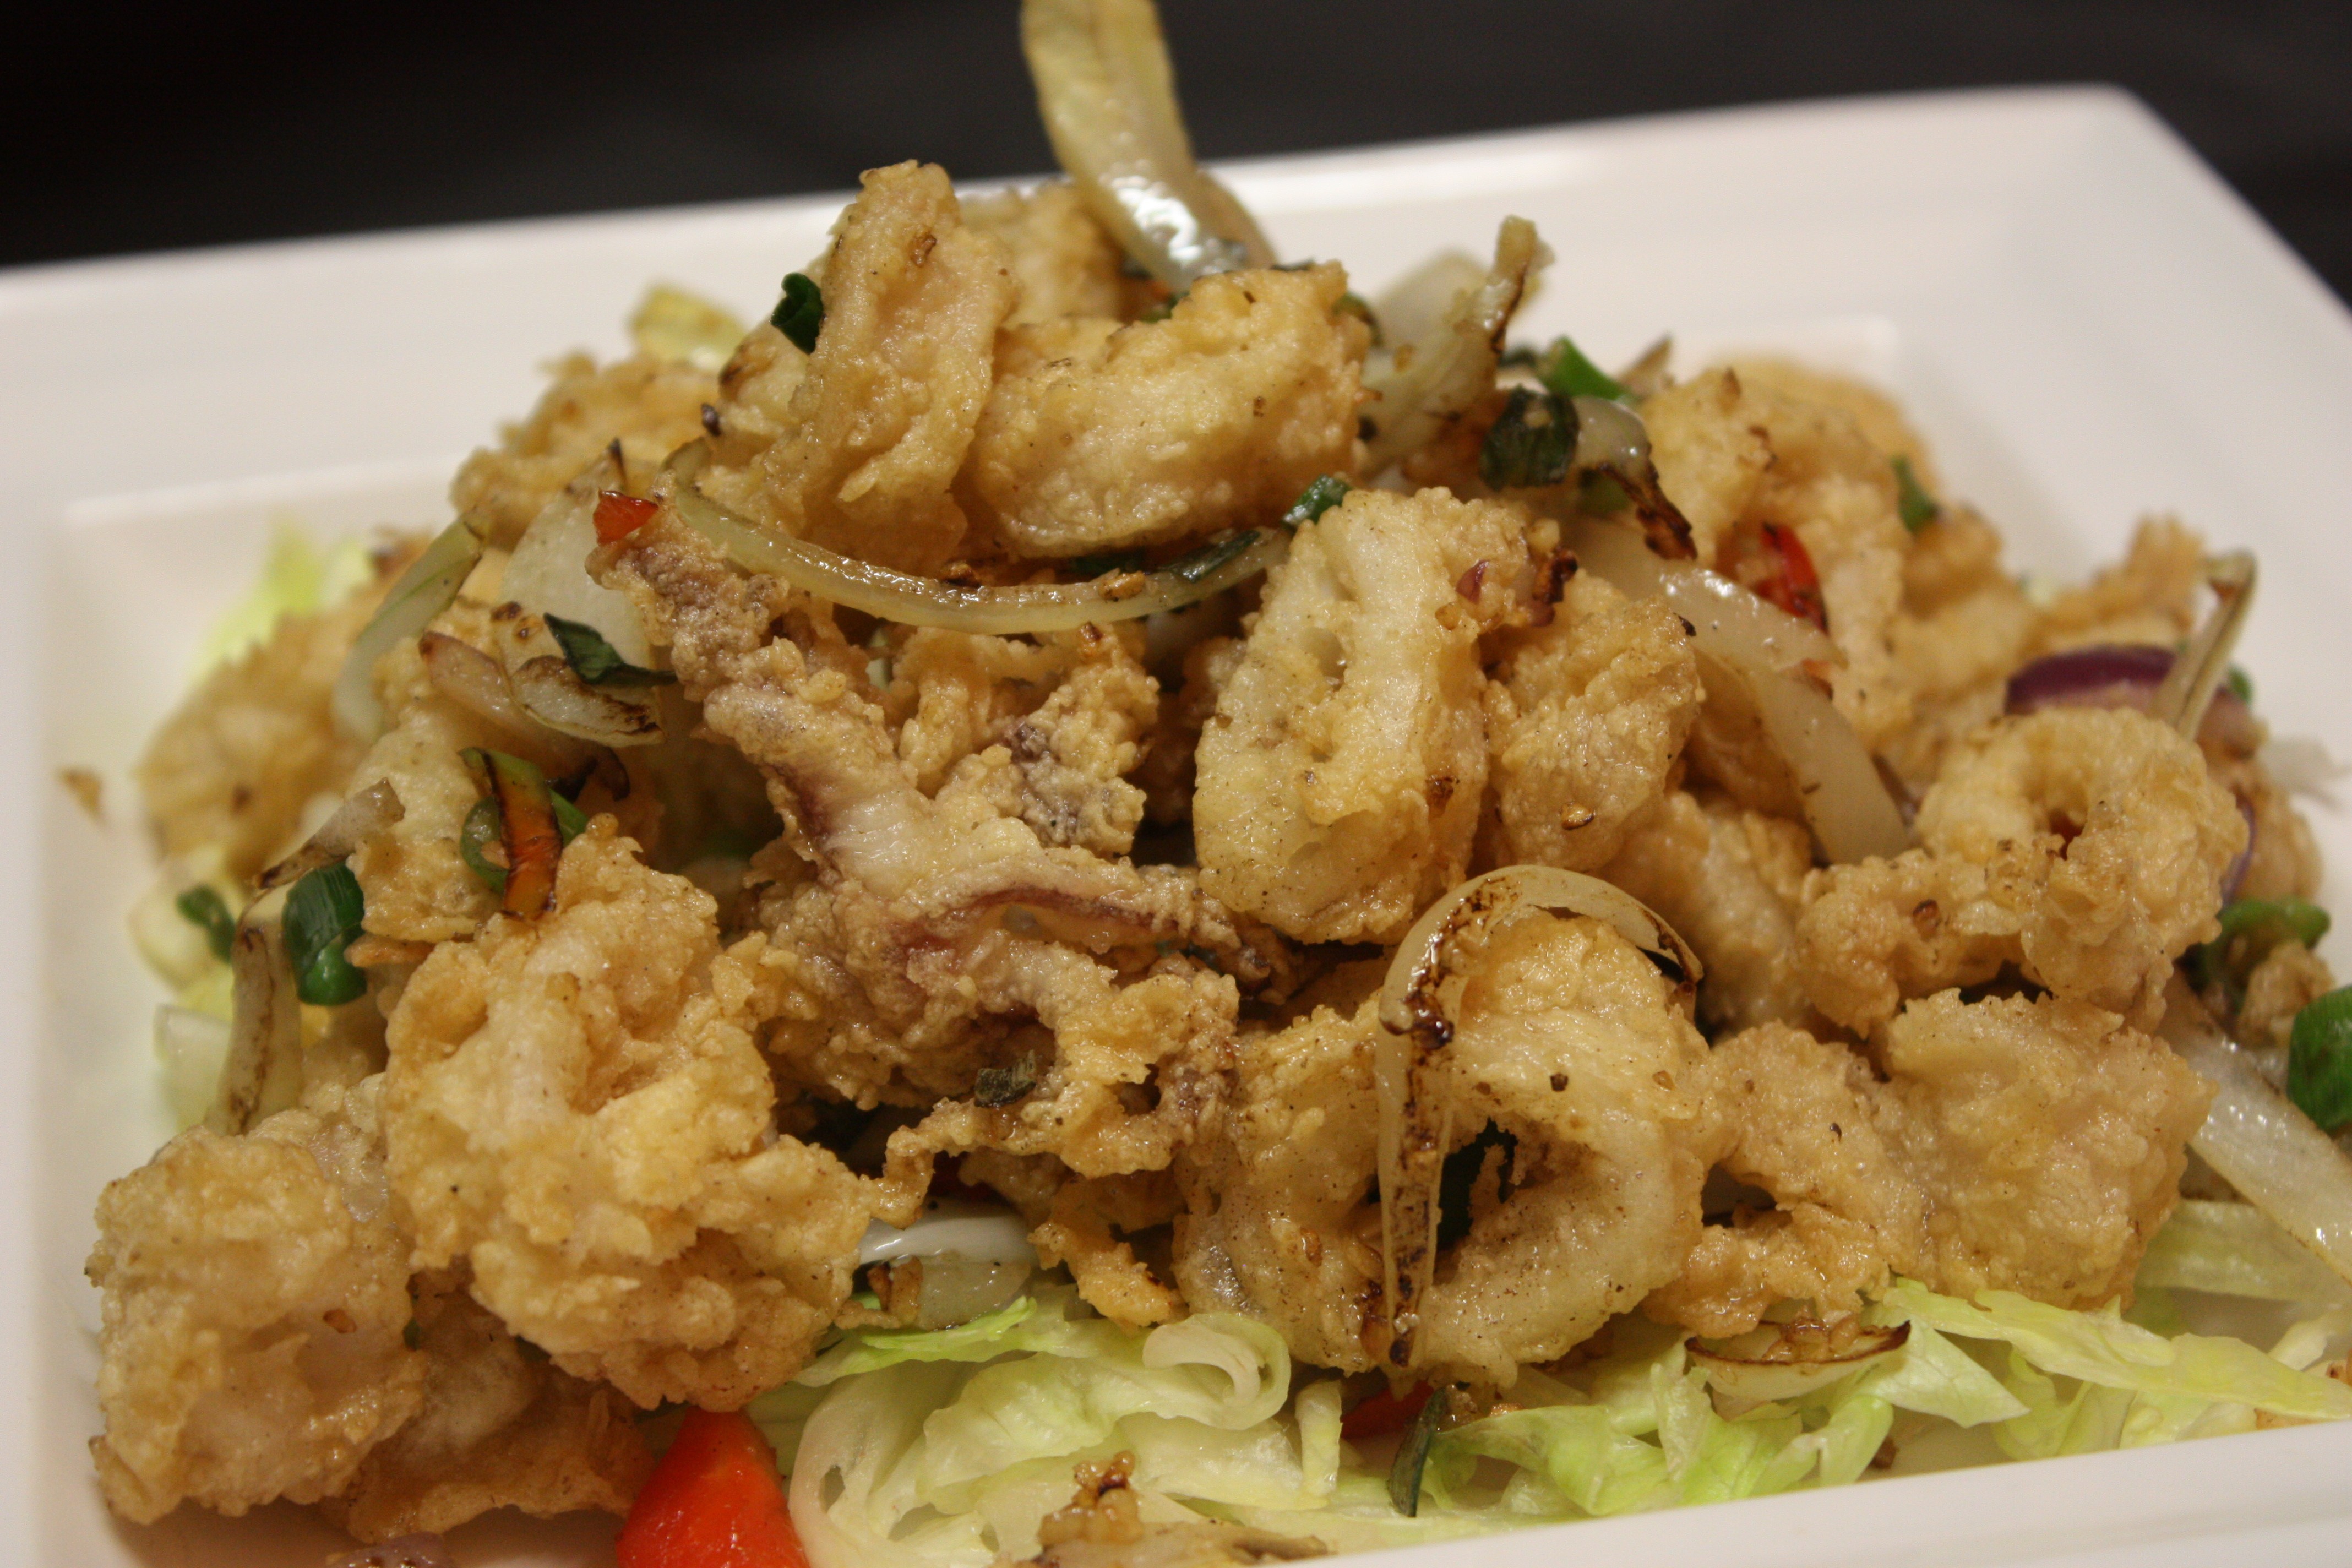 Spicy Salted Calamari at Noodle House Mitchell